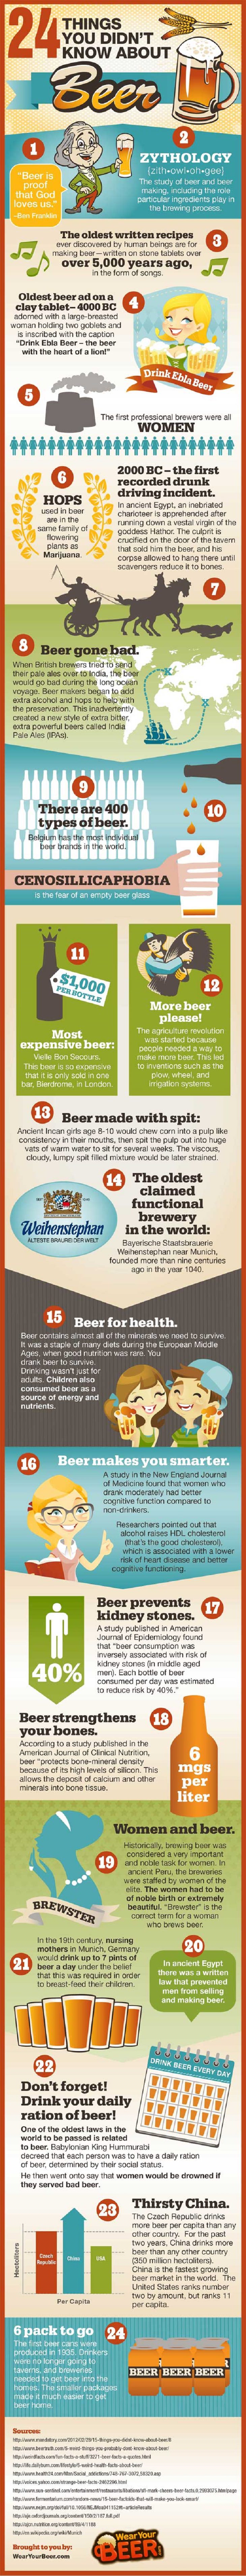 beer facts